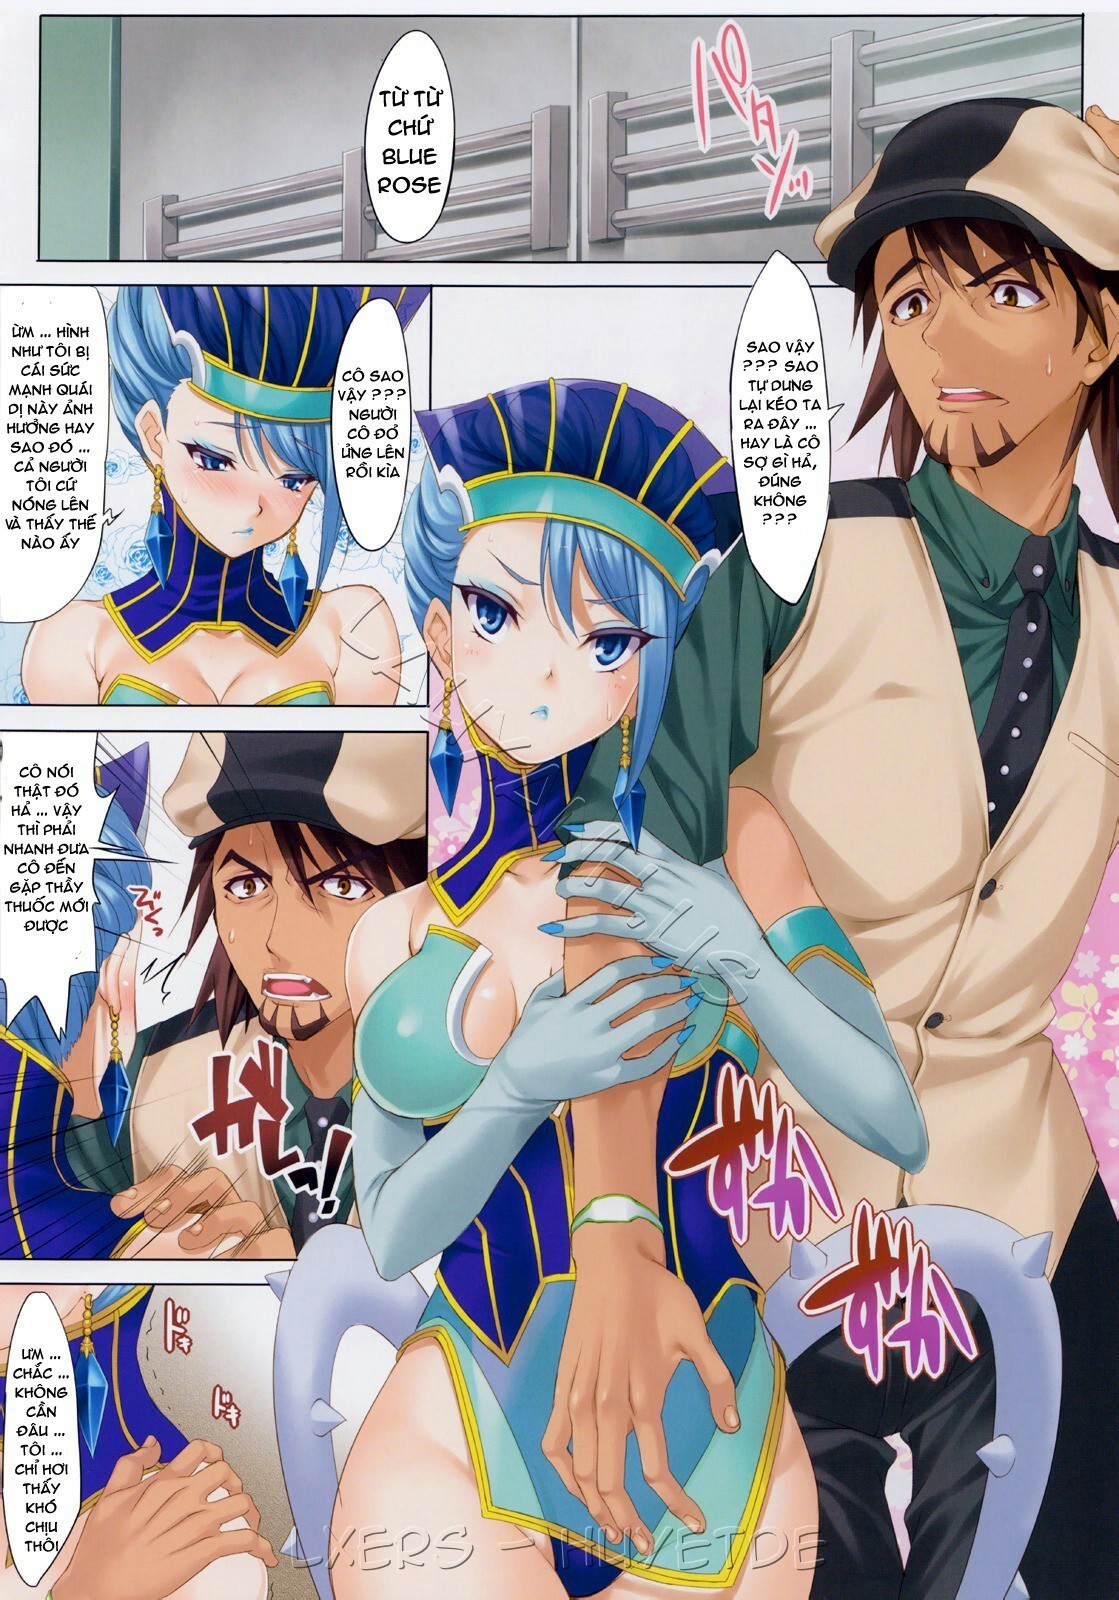 [clesta (Cle Masahiro)] CL-orz 18 (TIGER & BUNNY) [Vietnamese Tiếng Việt] [Decensored] page 2 full